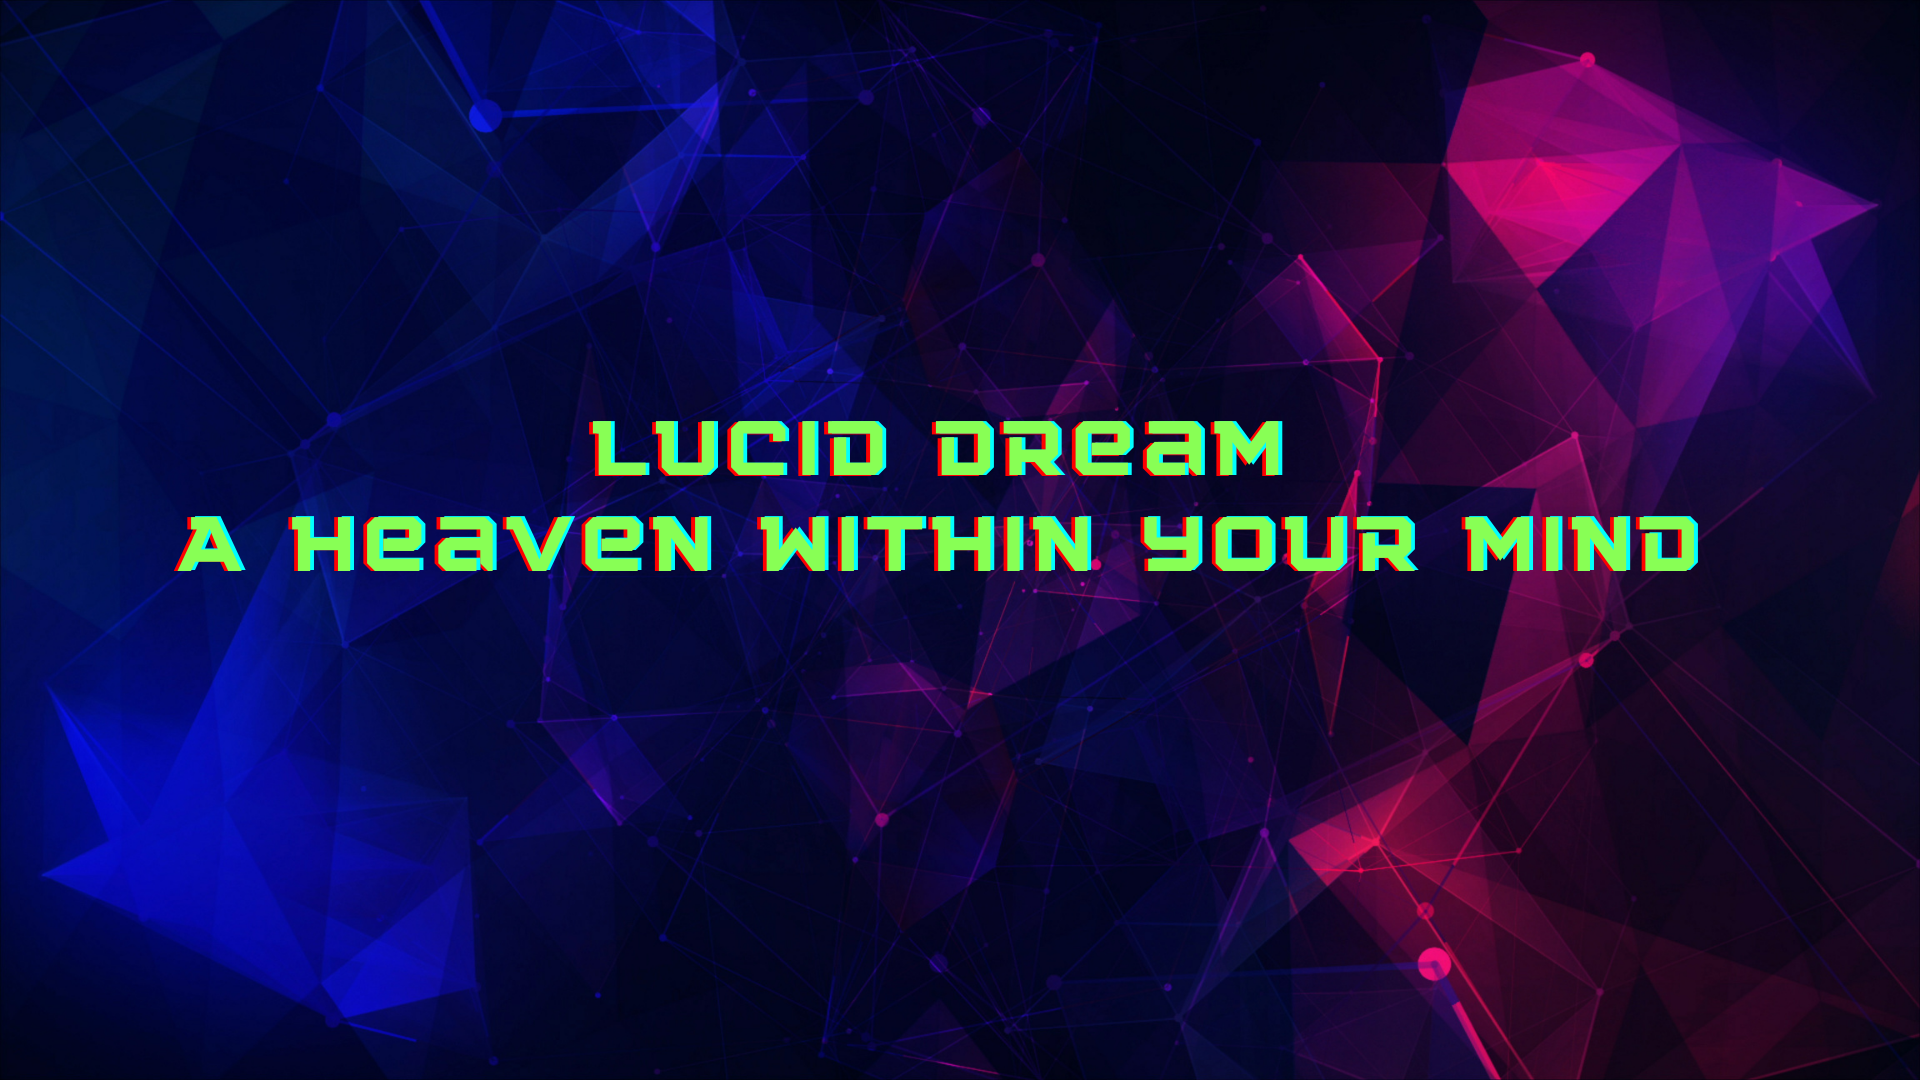 My Journey as a Lucid Dreamer